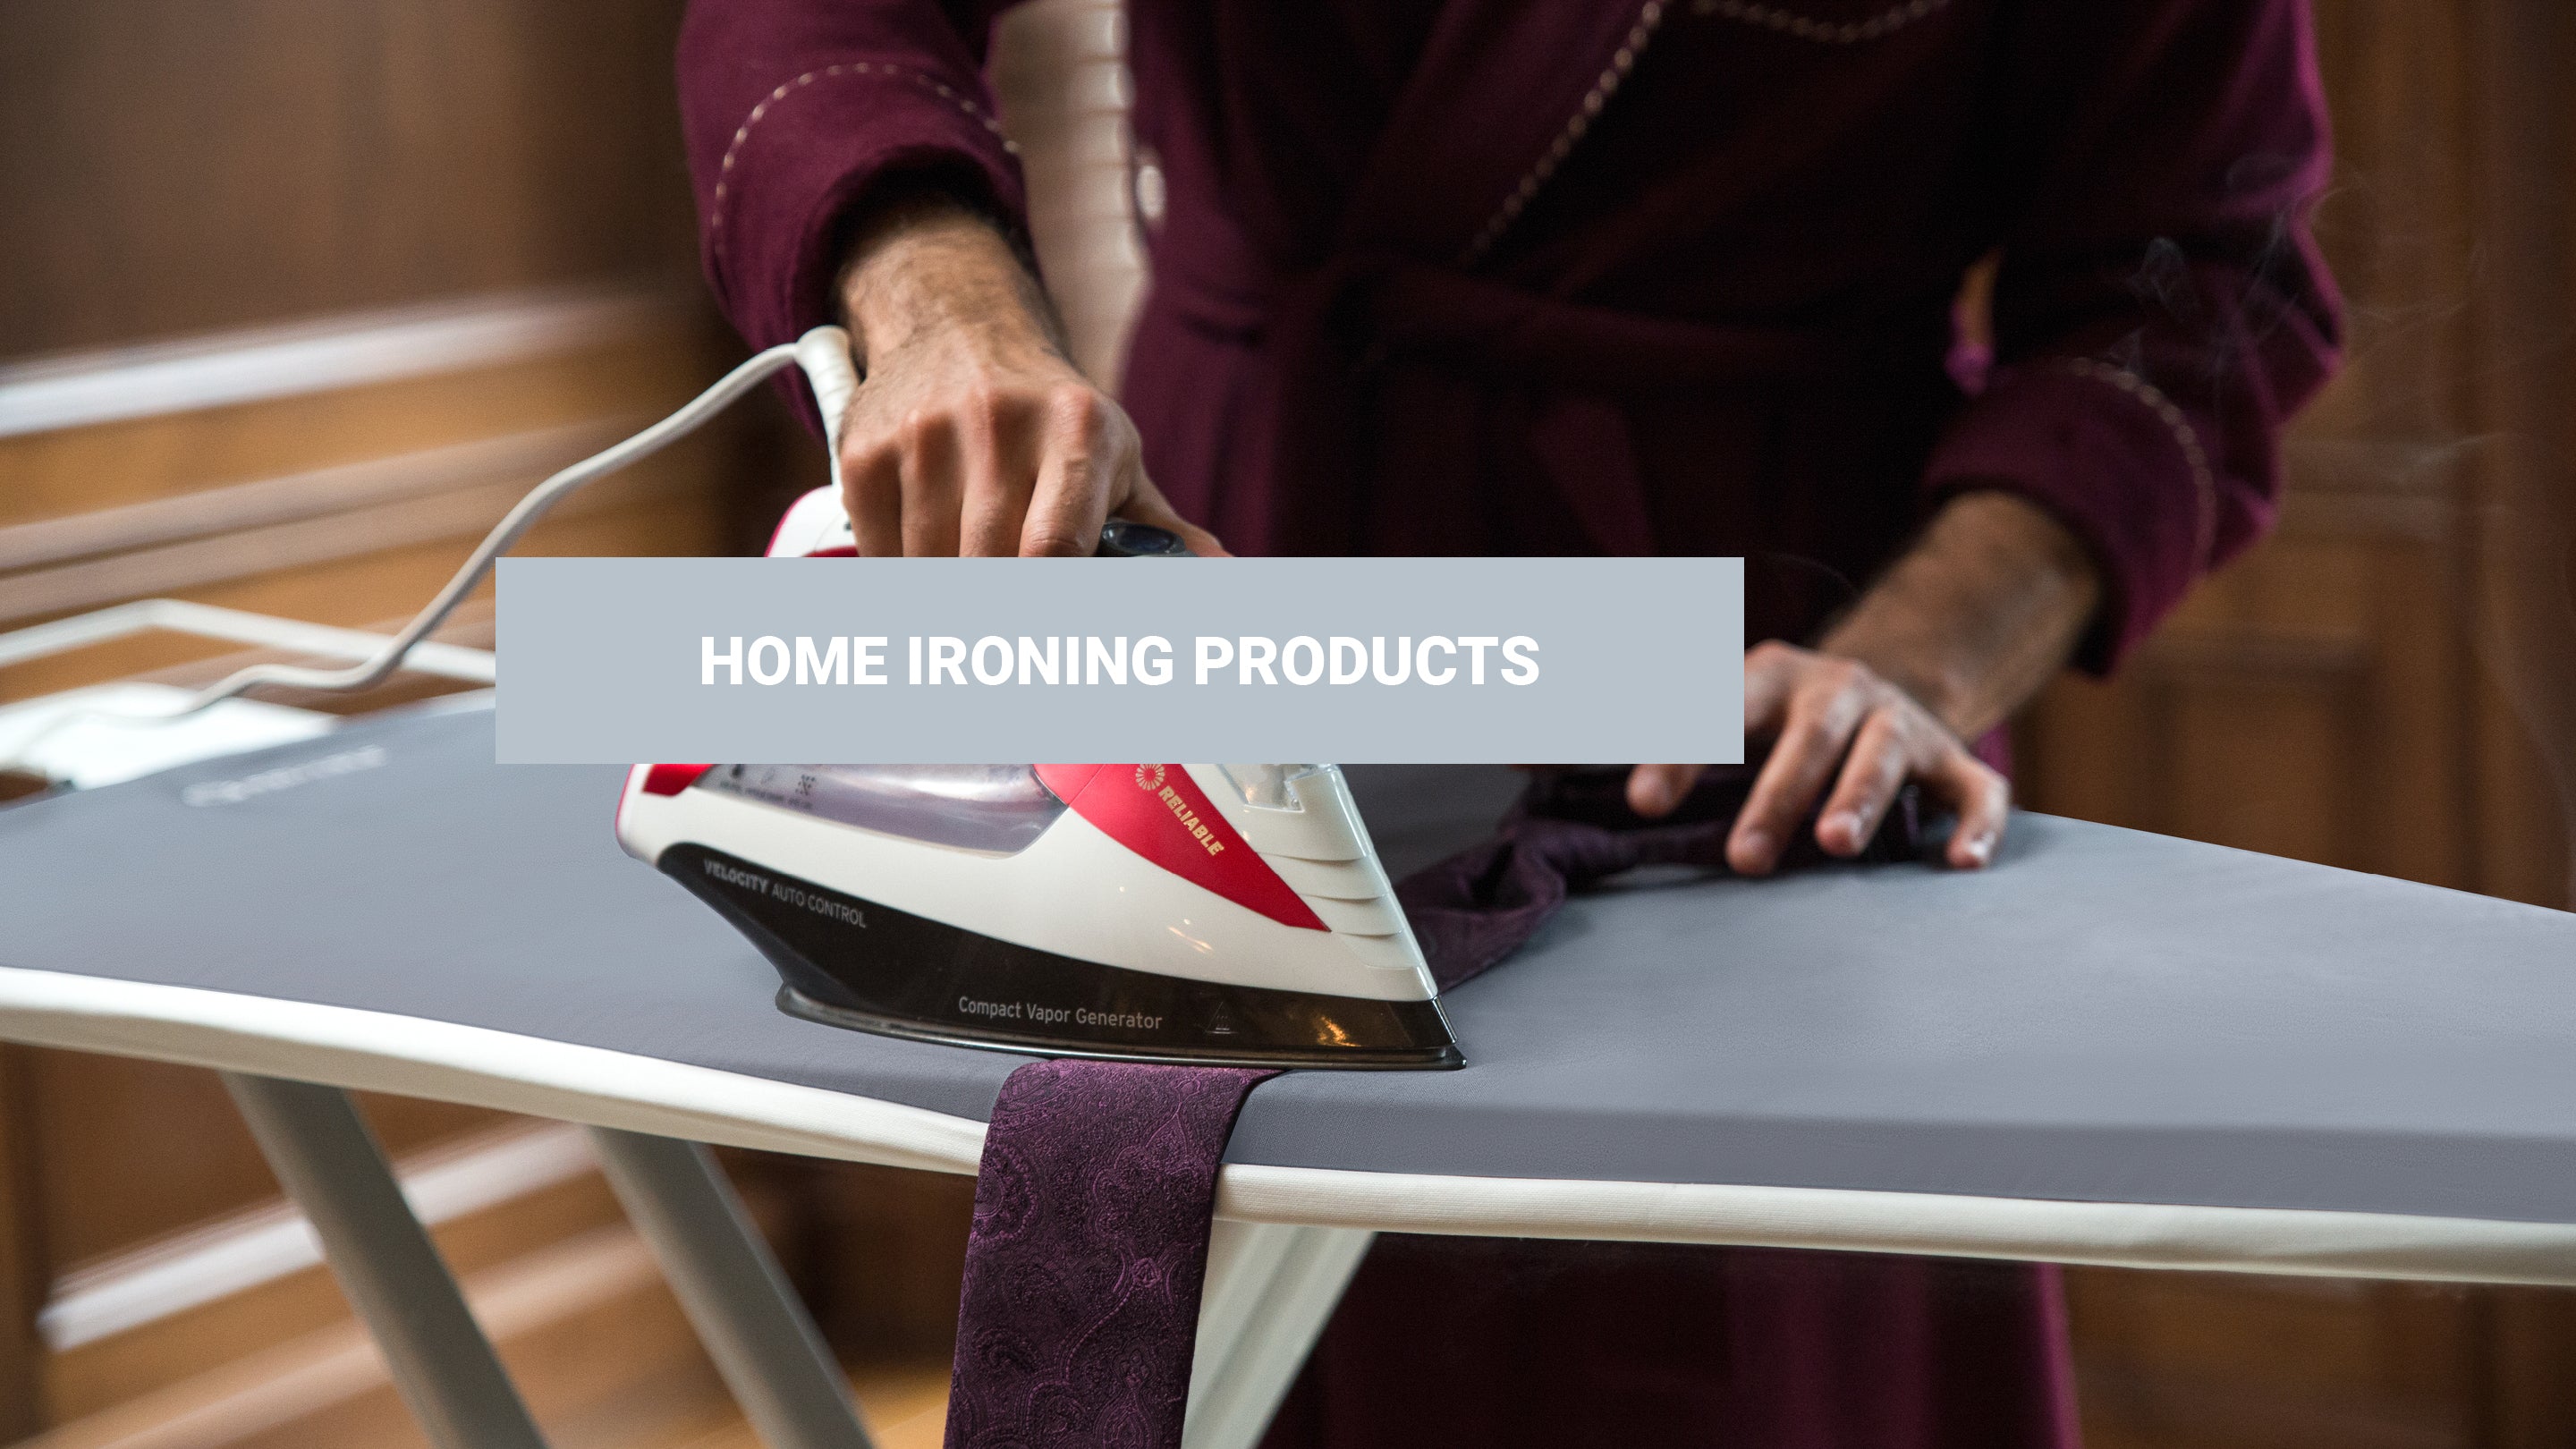 Home Ironing Products